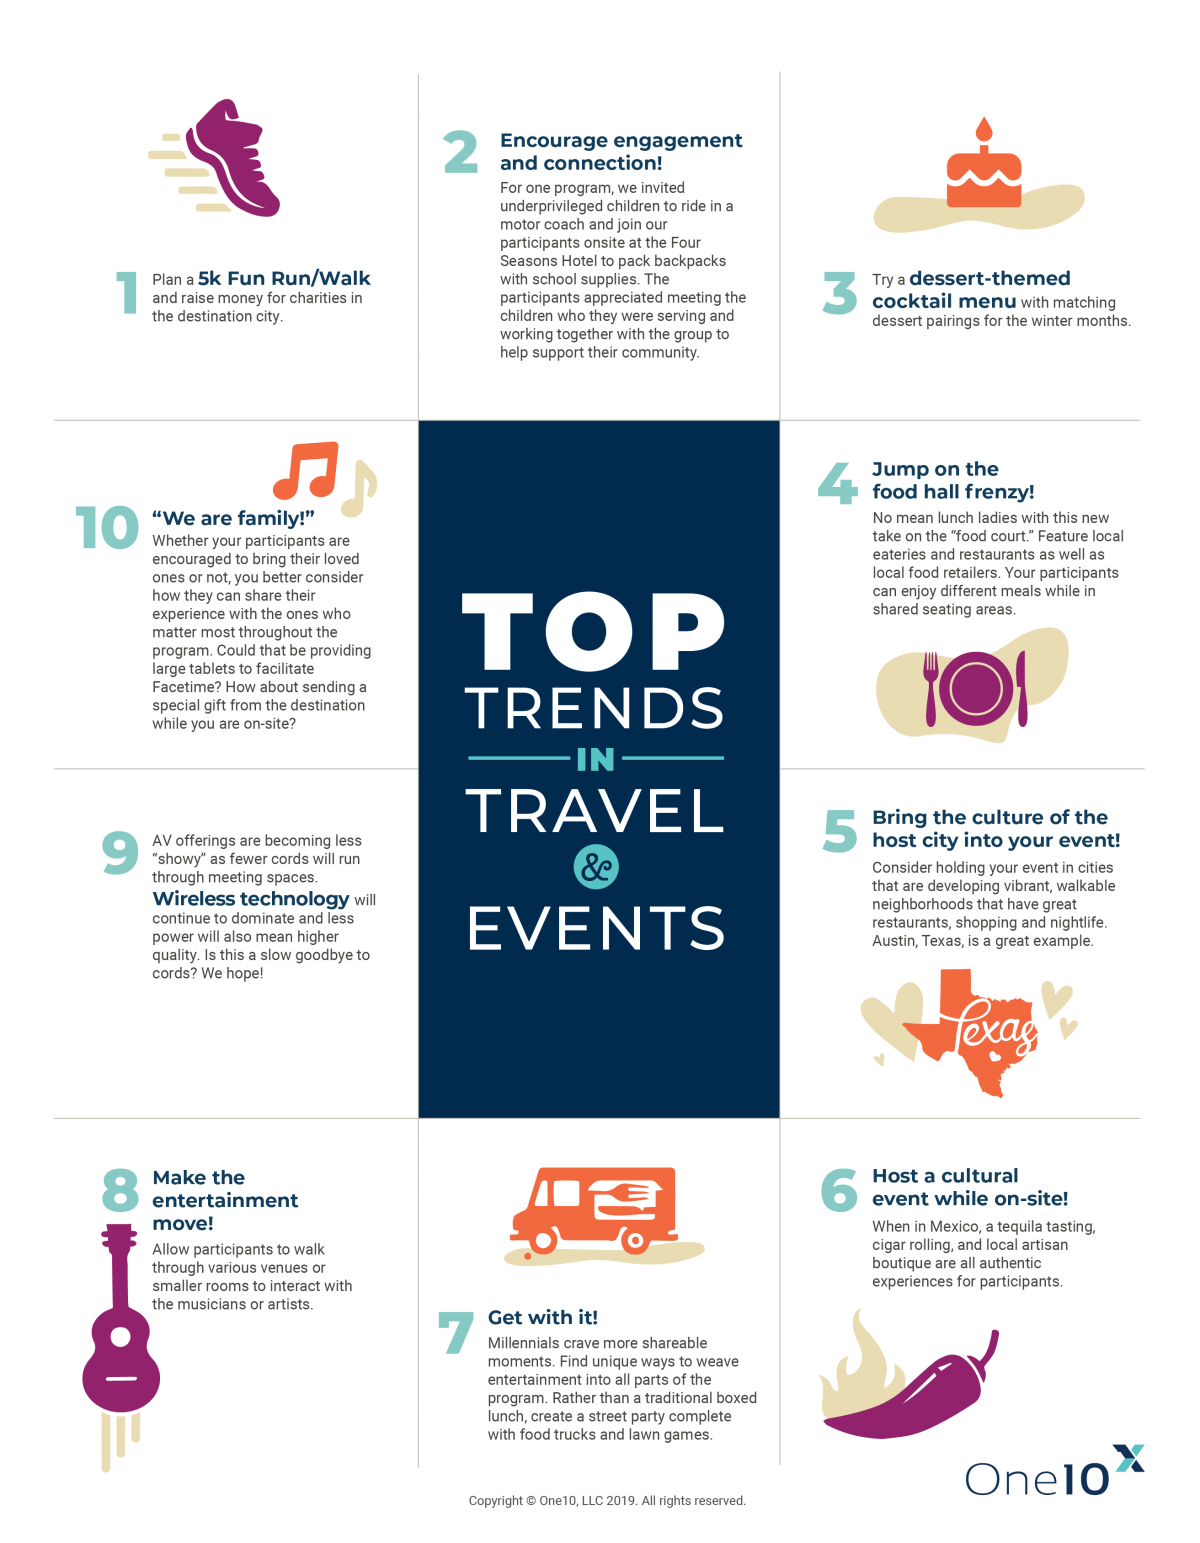 2019 Travel and Event Trends